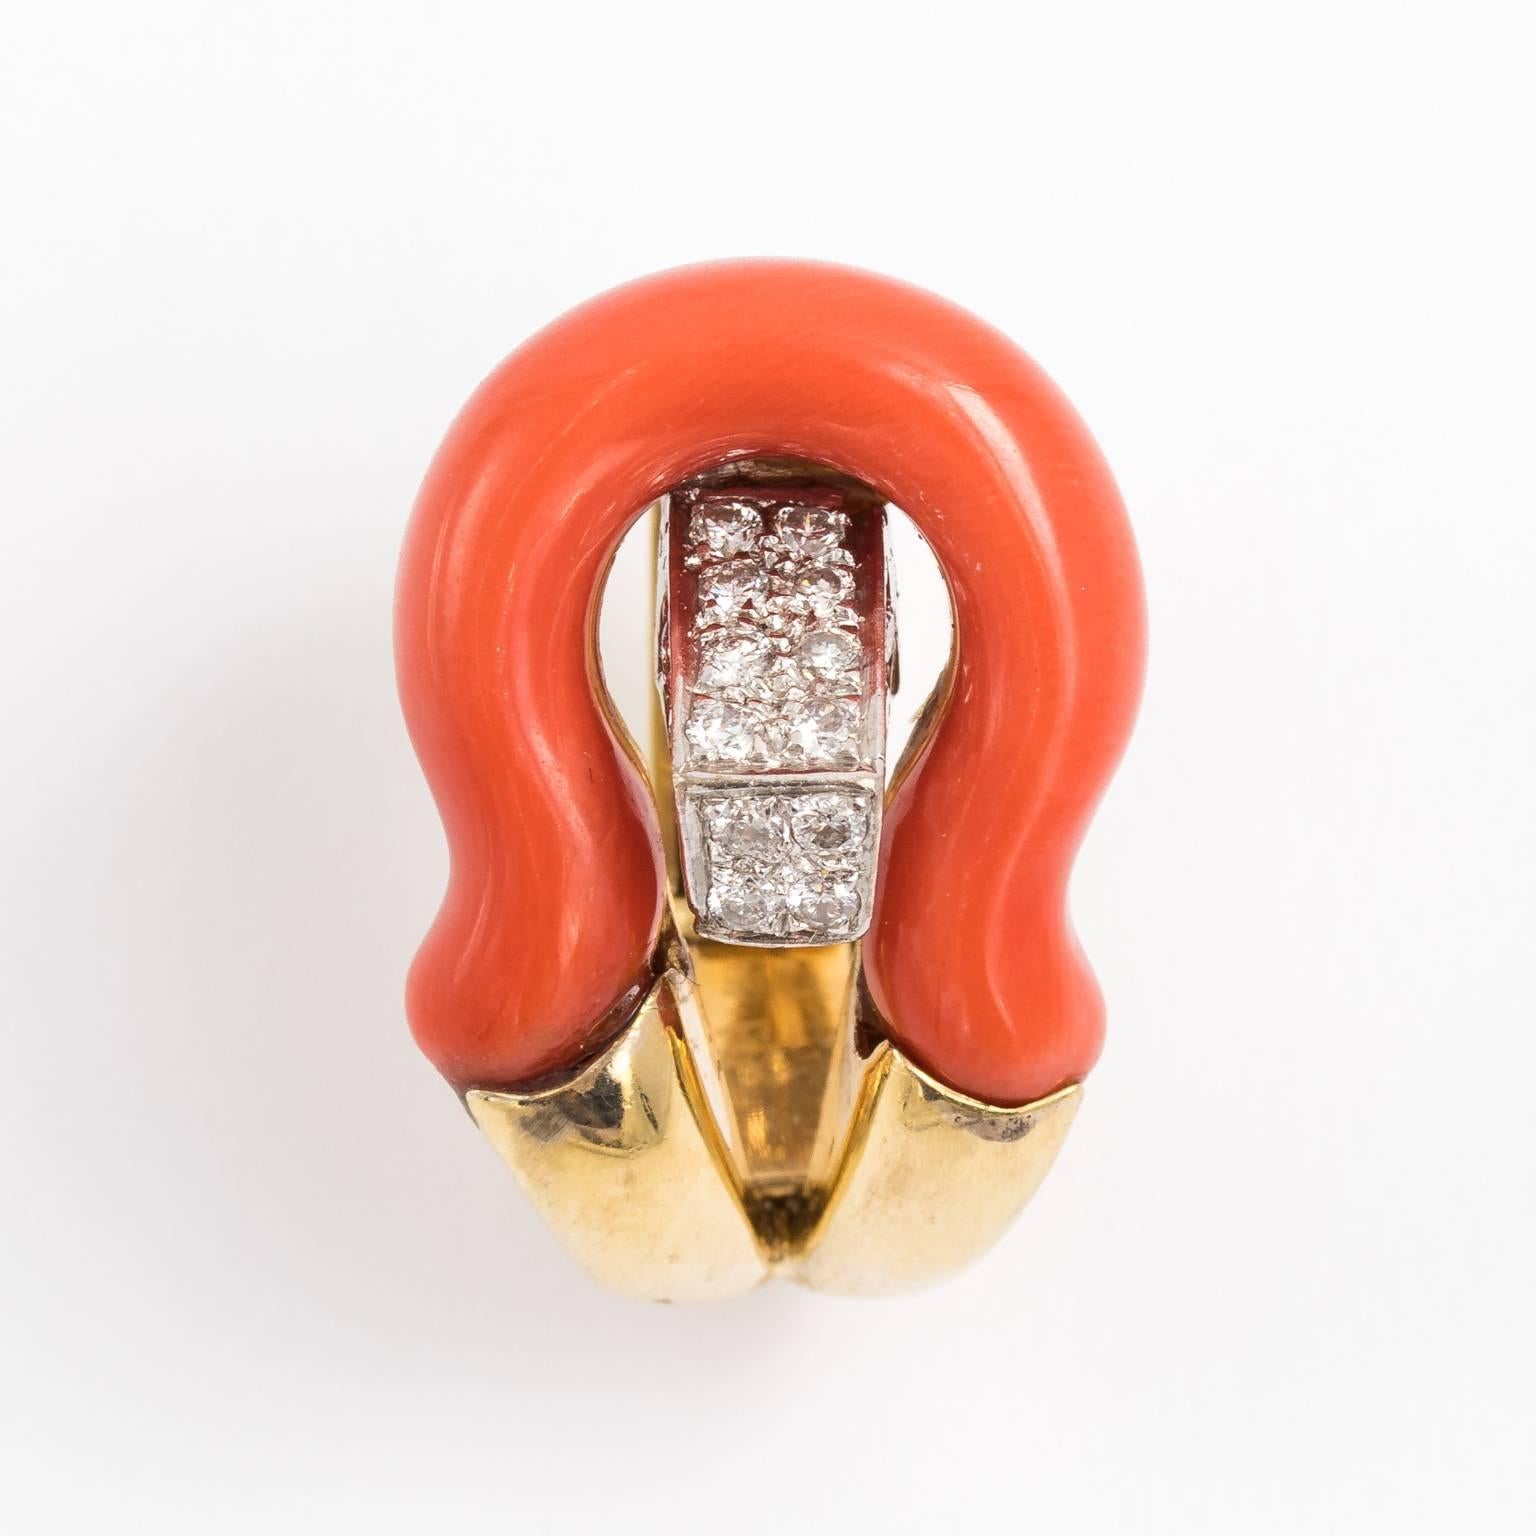 Circa 1980's Italian natural coral earrings with 18kt gold.